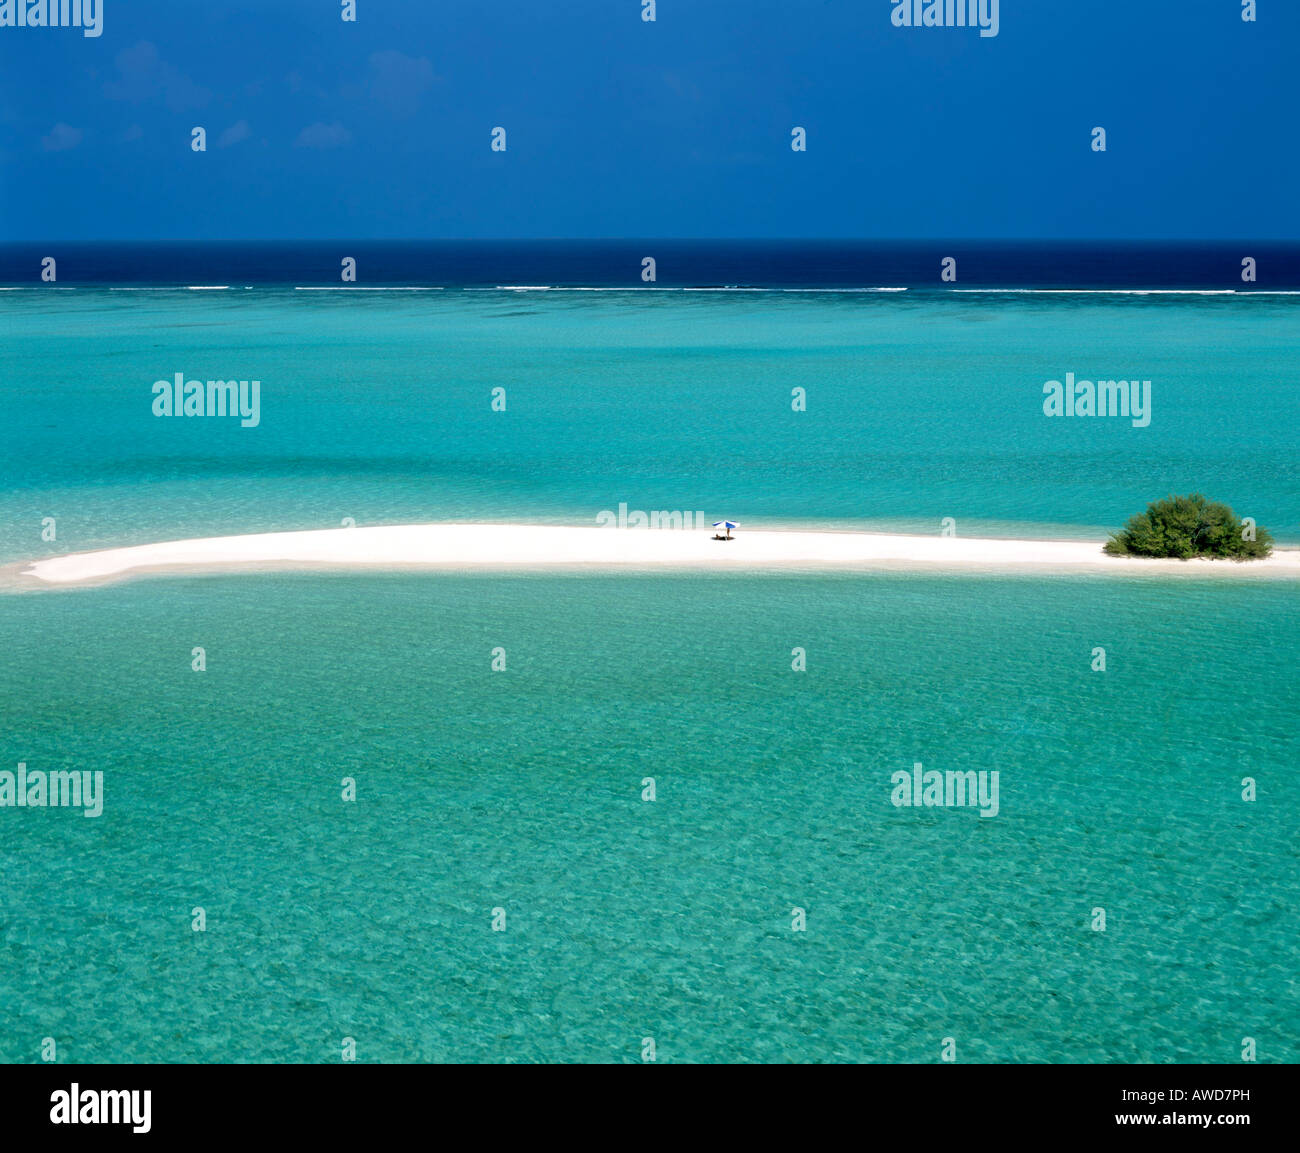 Aerial view of lone sun umbrella on a sand bank, lagoon, turquoise waters, Maldives, Indian Ocean Stock Photo